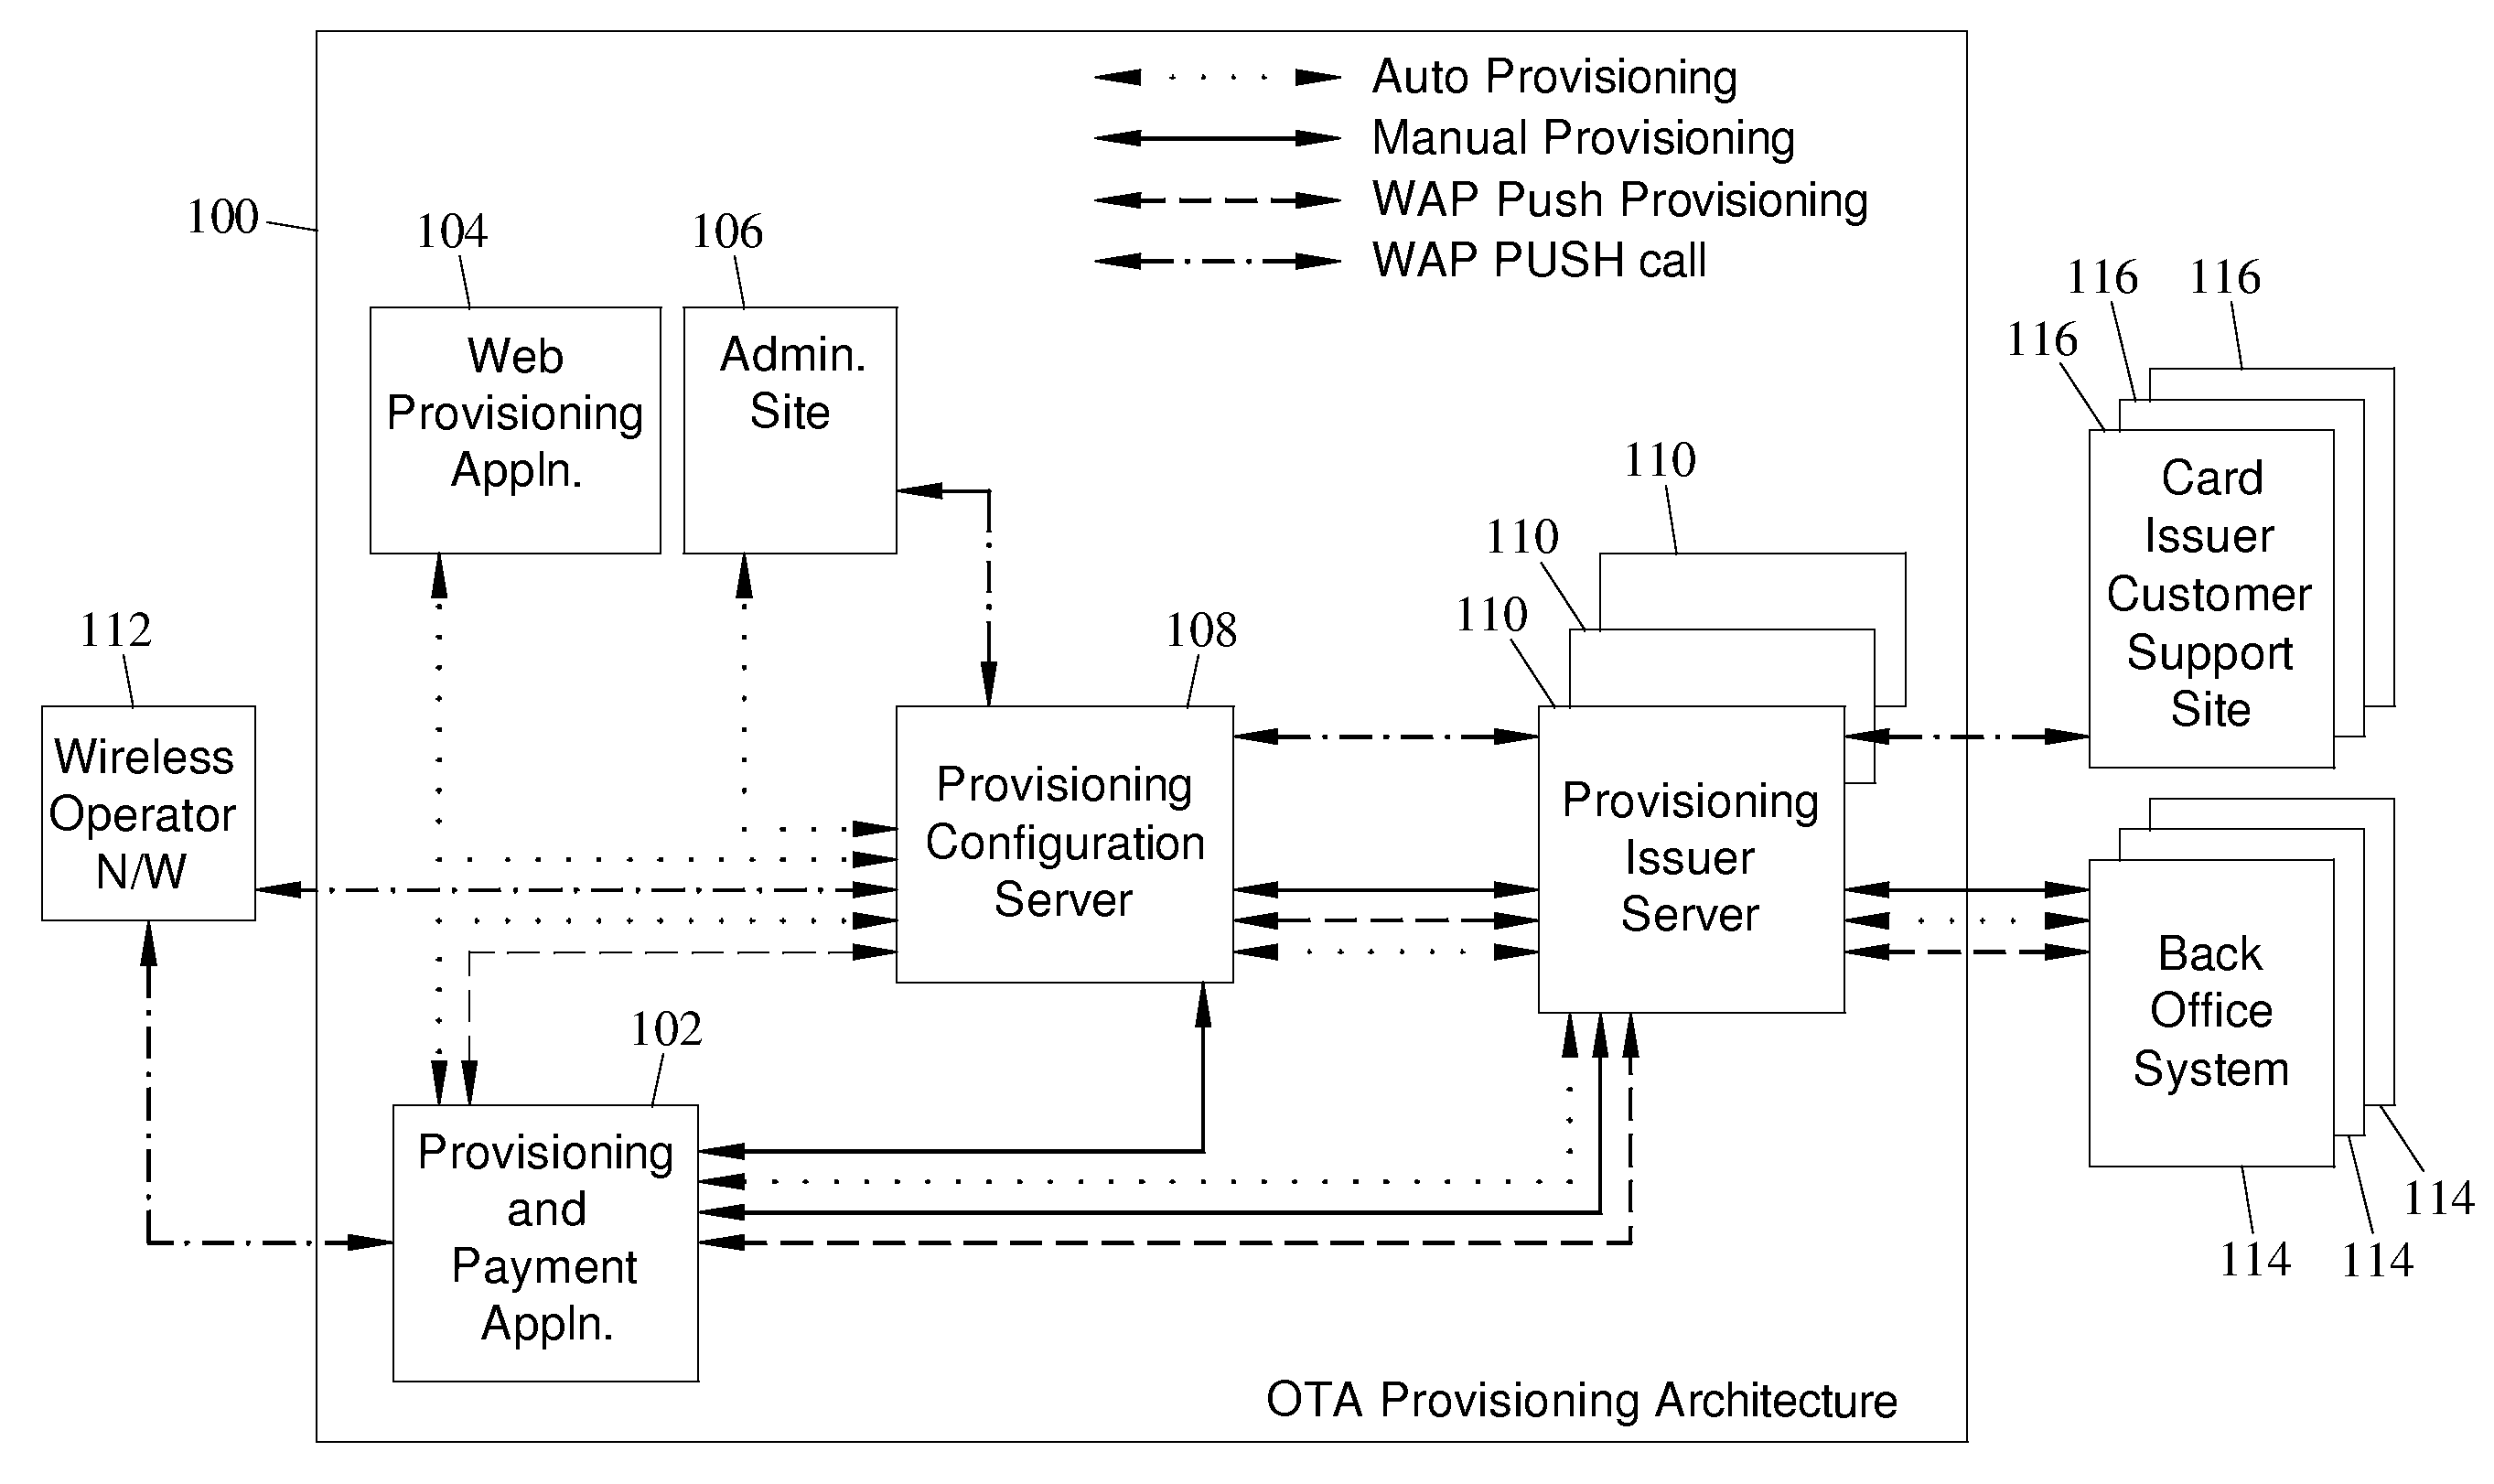 Methods, systems, and computer readable media for over the air (OTA) provisioning of soft cards on devices with wireless communications capabilities